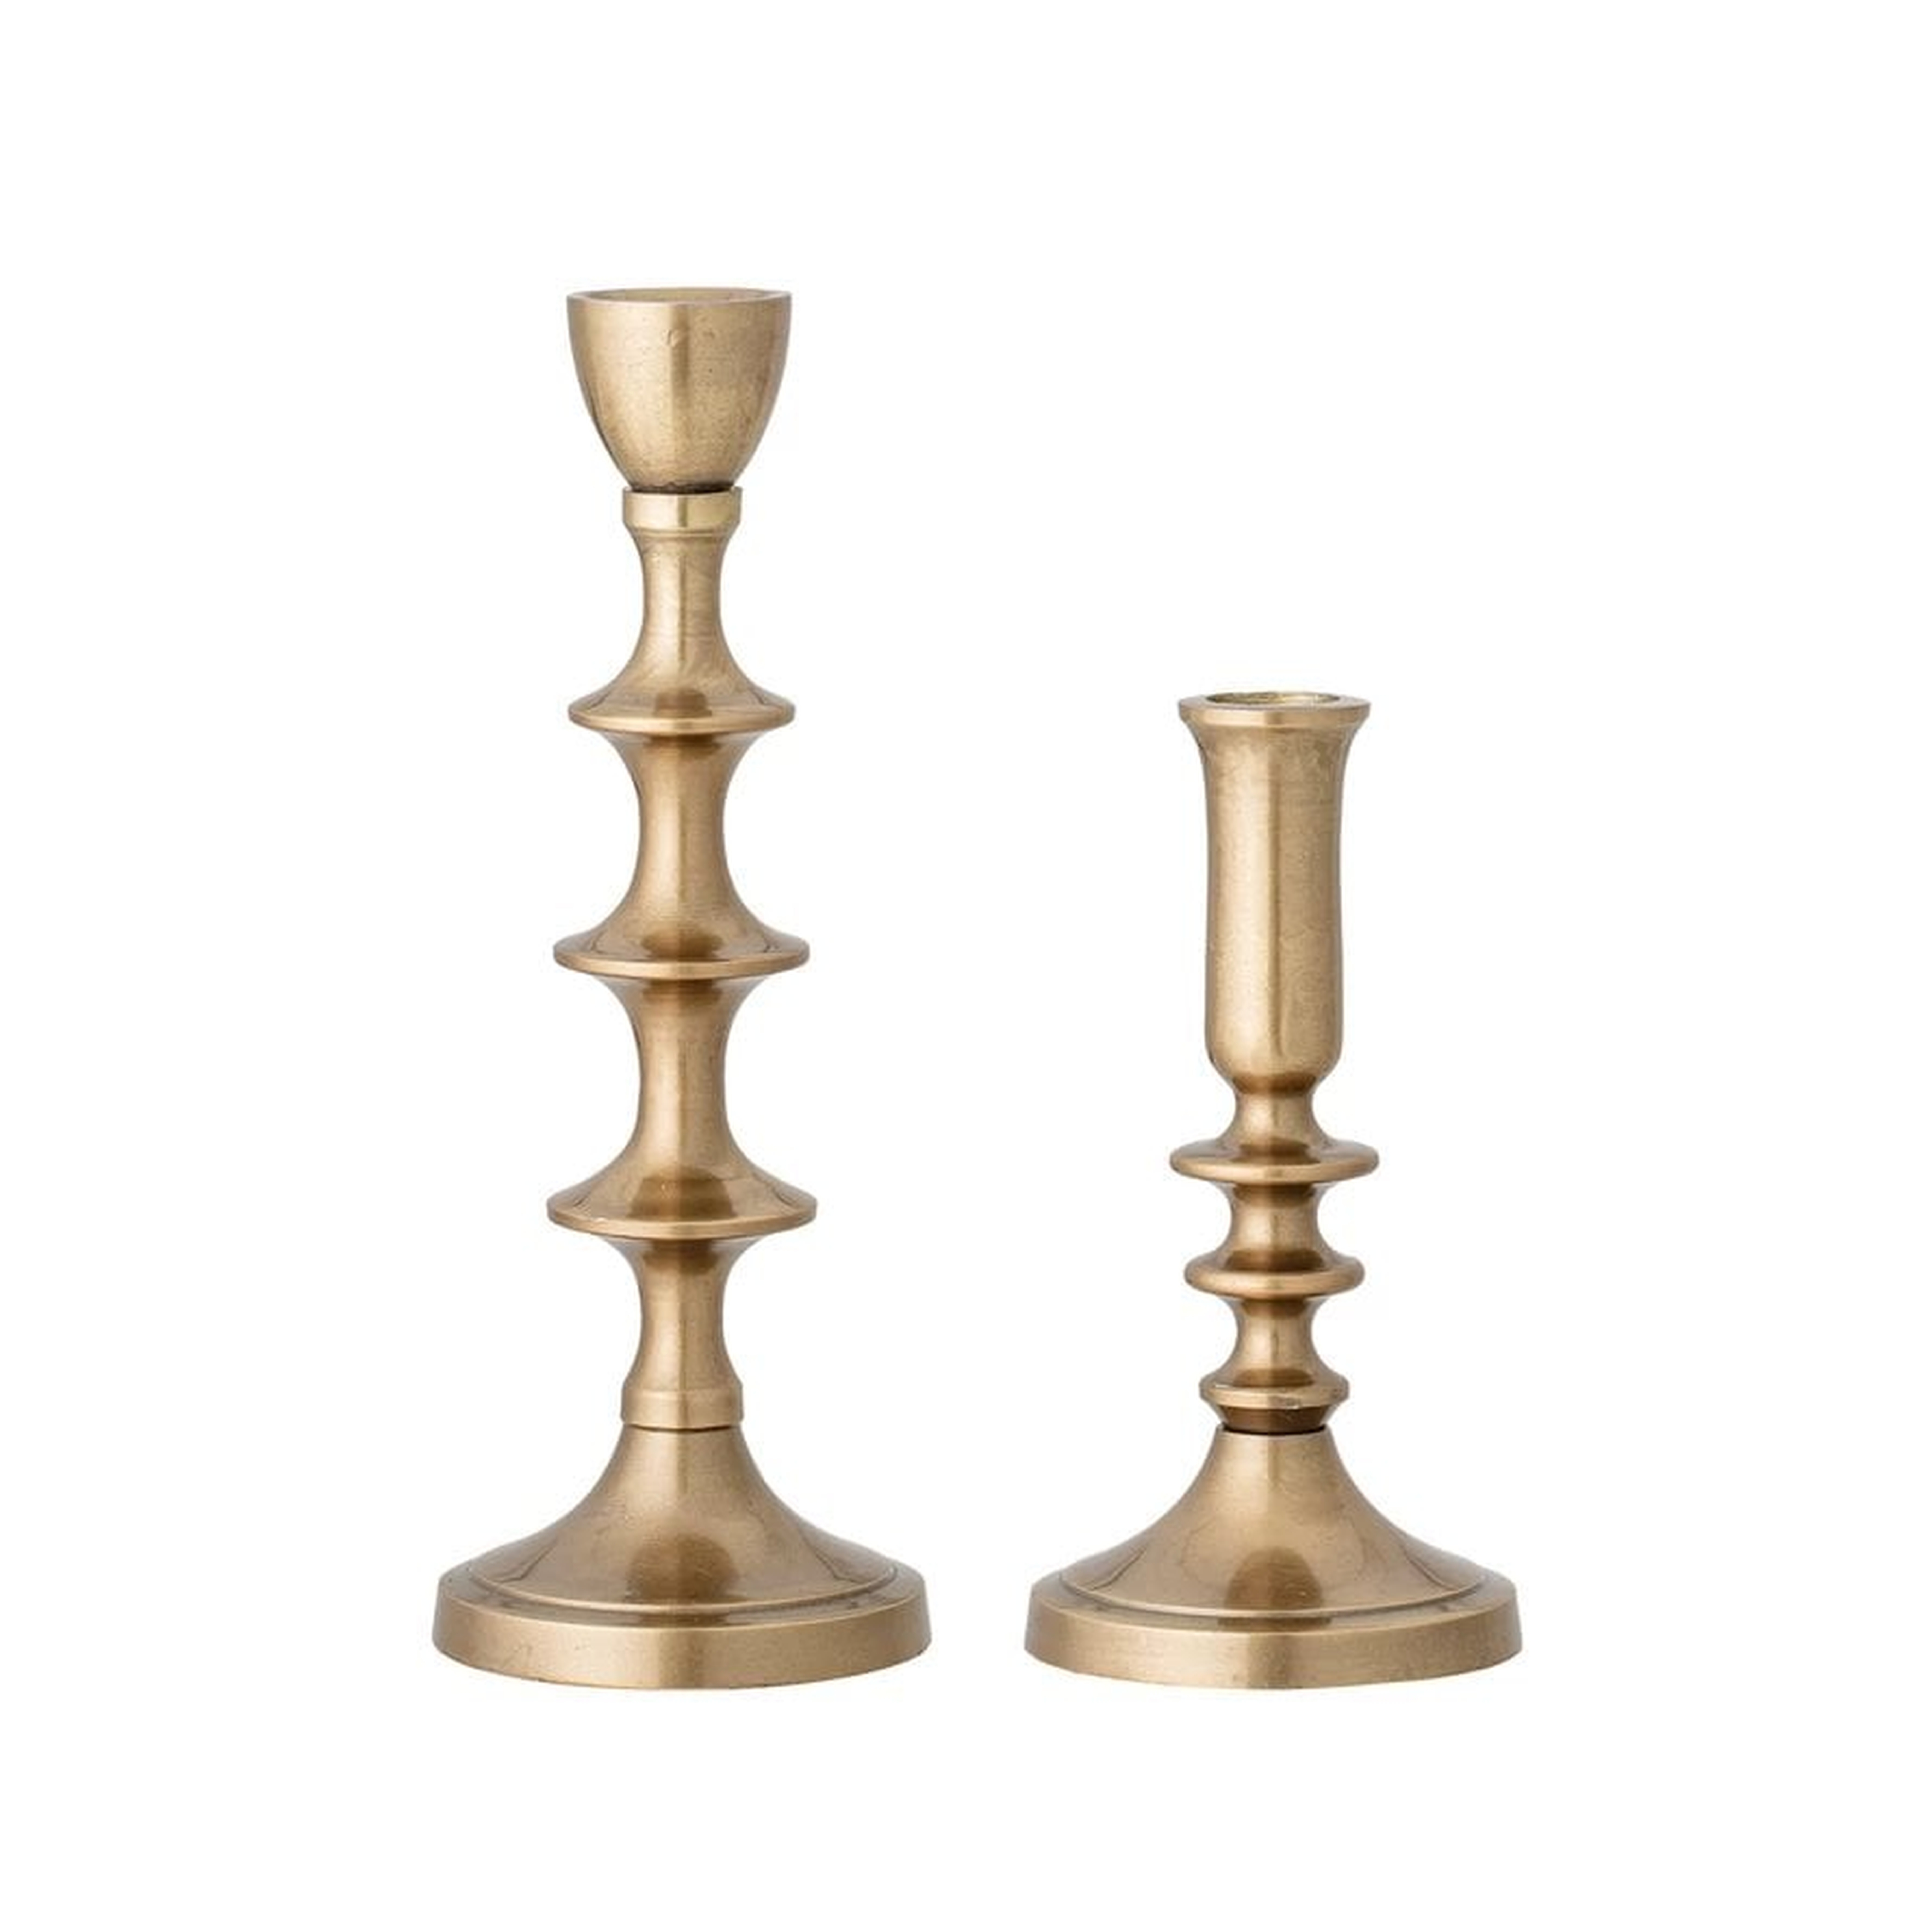 Decorative Taper Candle Holders, Gold, Set of 2 - Nomad Home